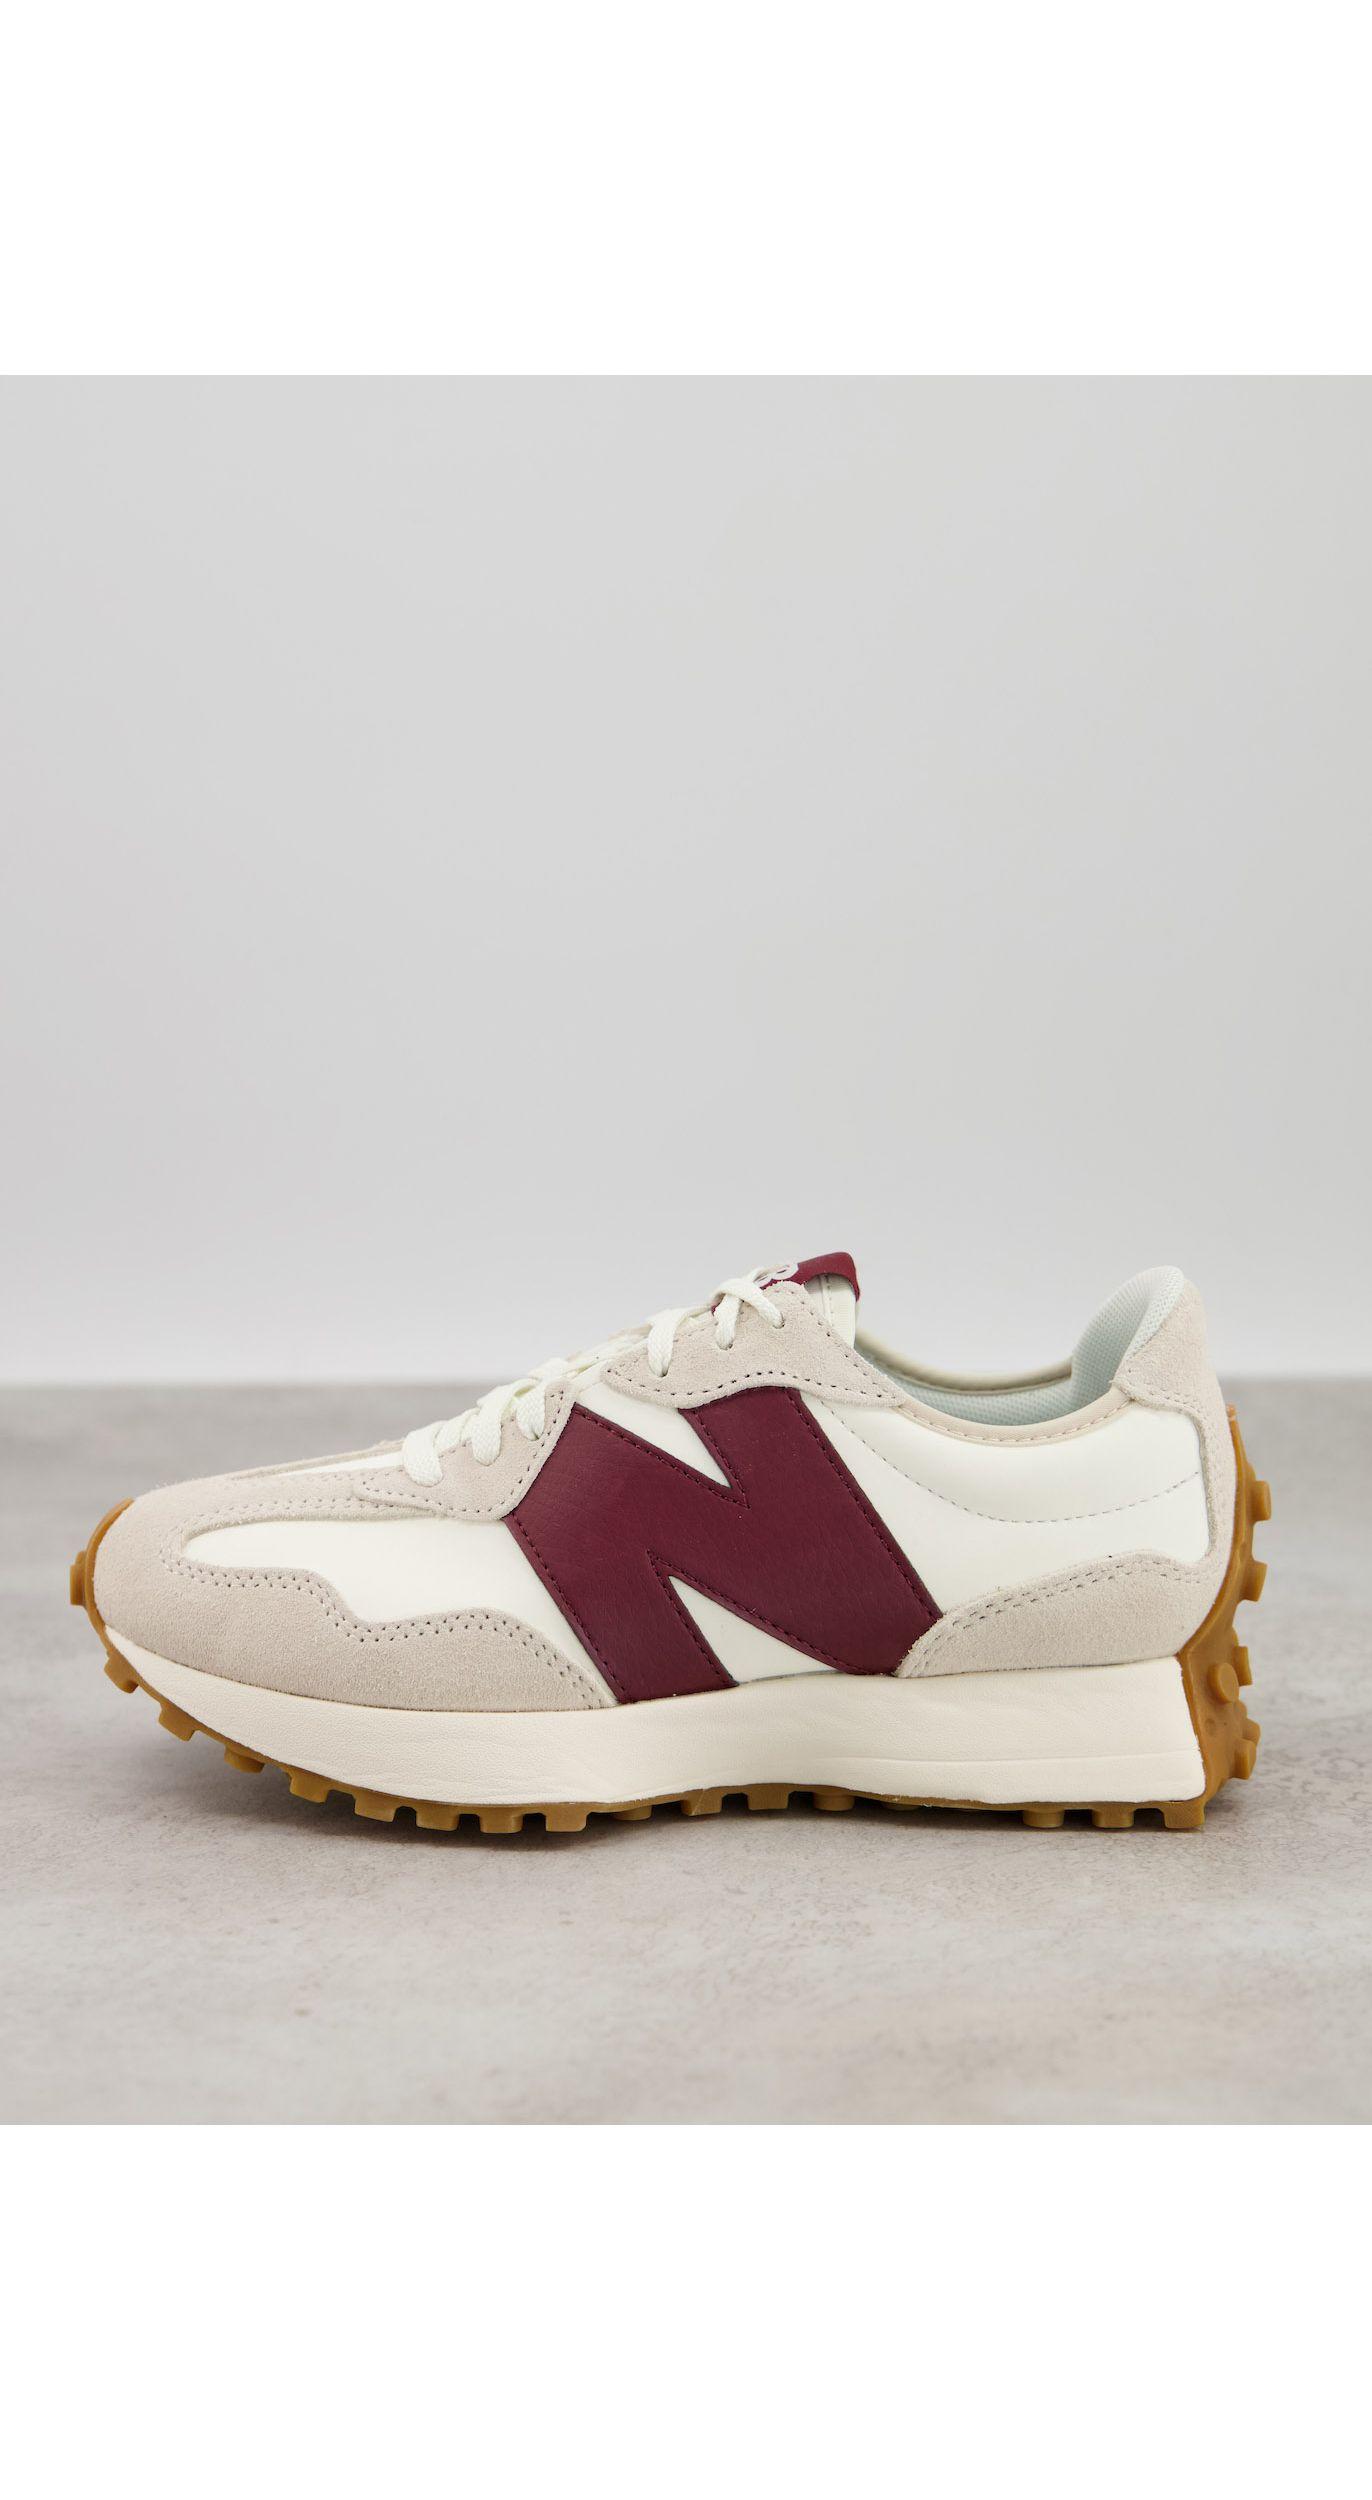 New Balance 327 Trainers in |